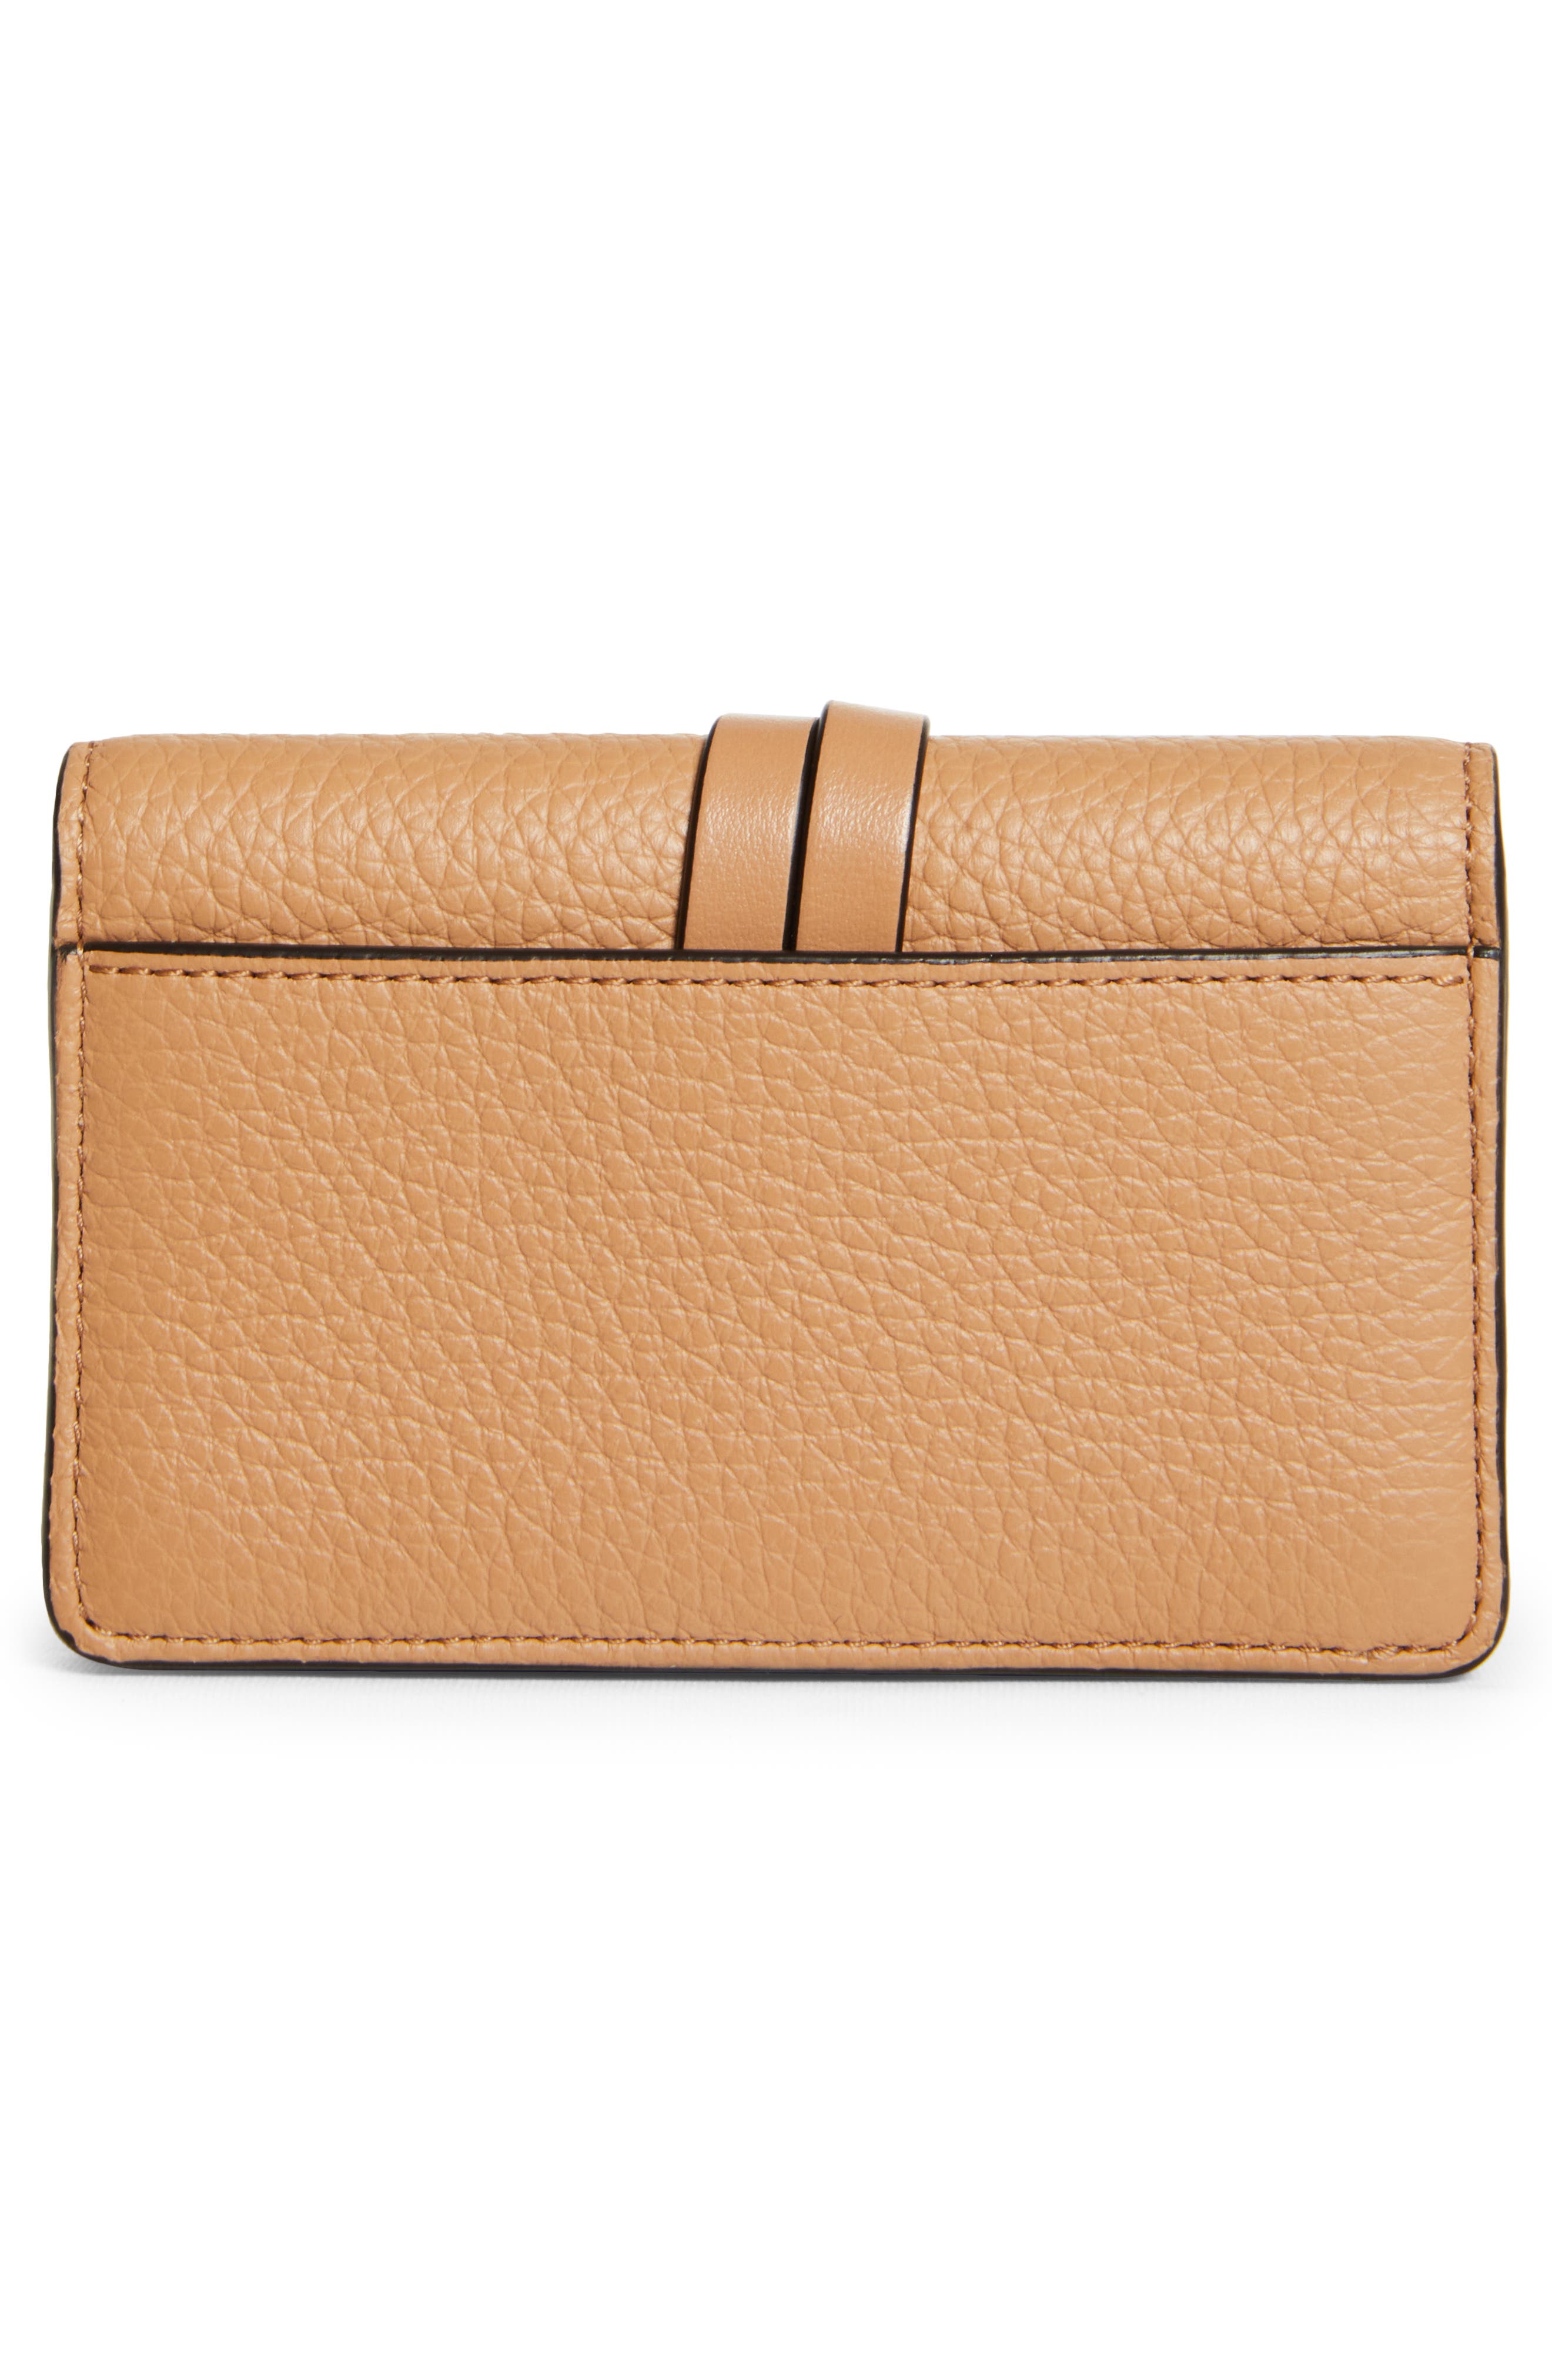 Chloé Leather Alphabet Compact Wallet in Light Tan Natural Womens Accessories Wallets and cardholders 